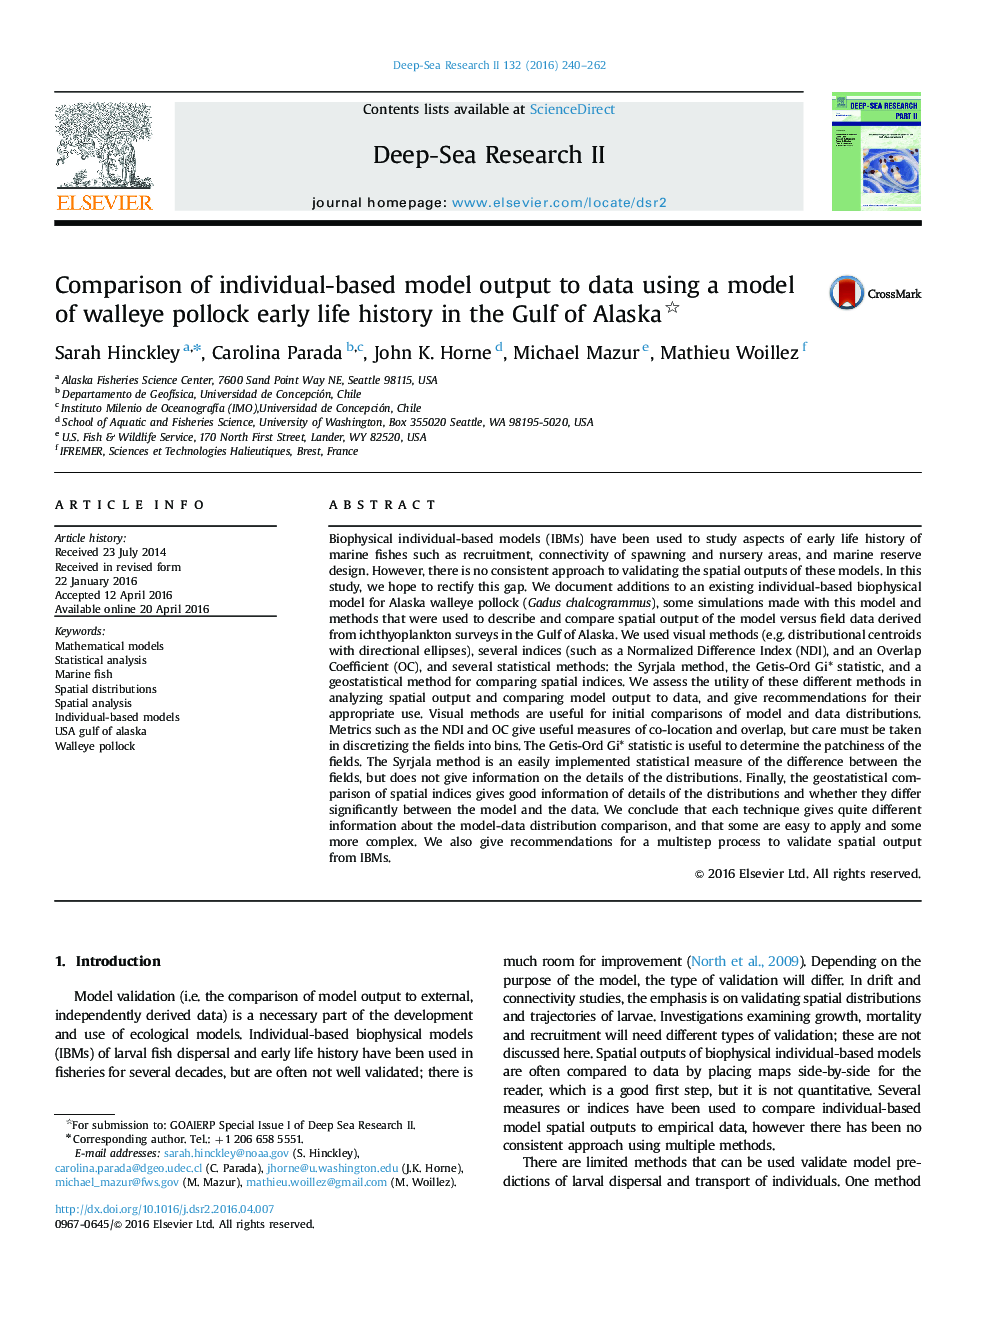 Comparison of individual-based model output to data using a model of walleye pollock early life history in the Gulf of Alaska 